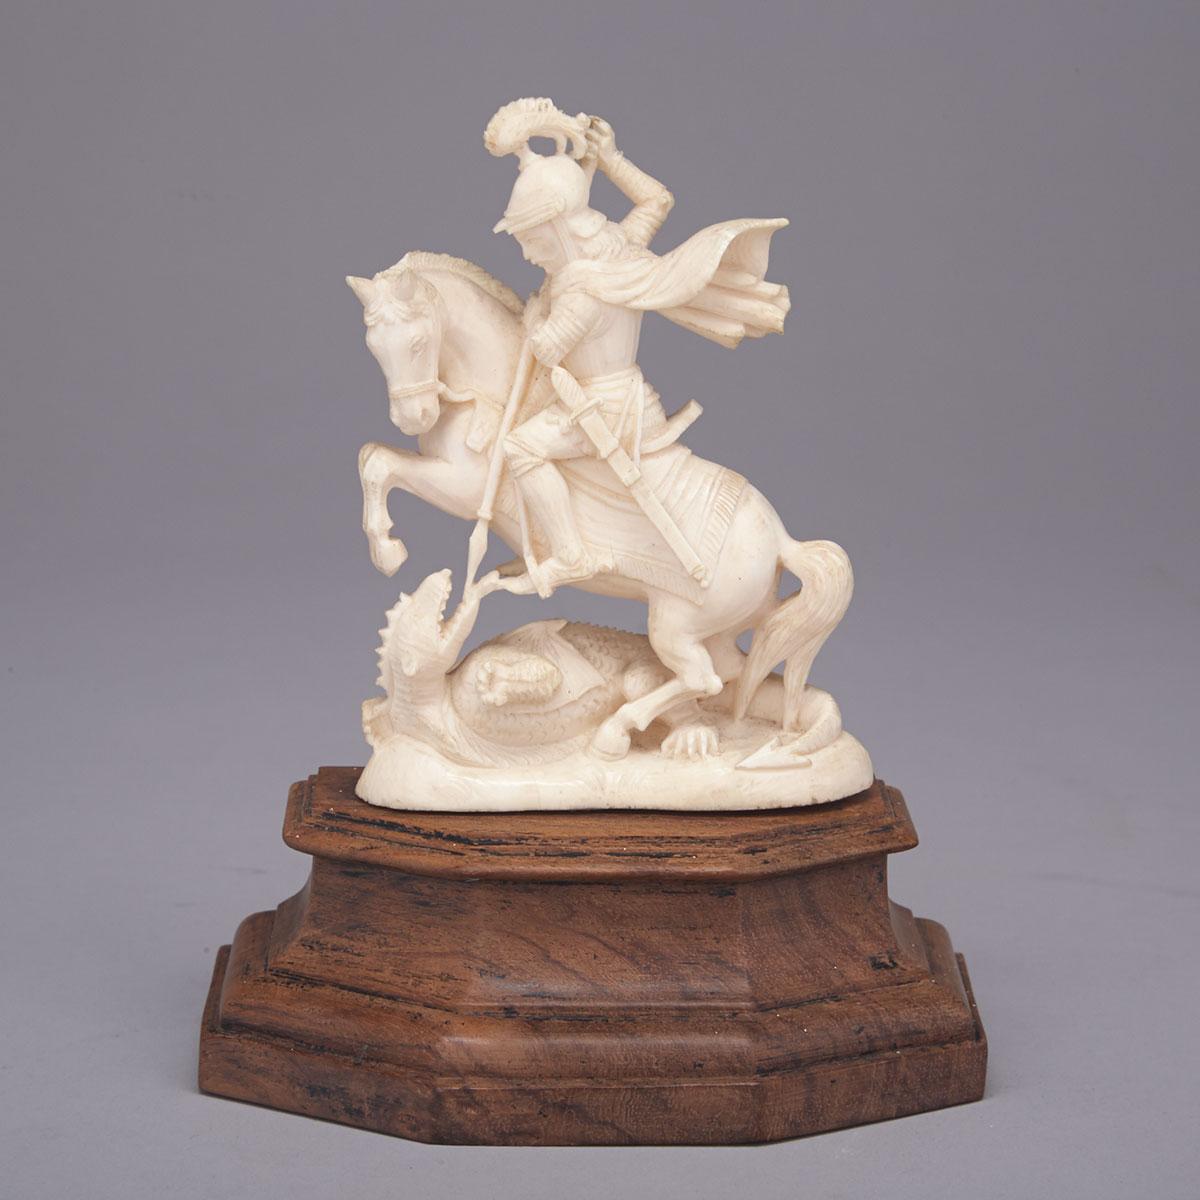 Anglo-Indian Carved Ivory Group of St. George Slaying Dragon, 19th century